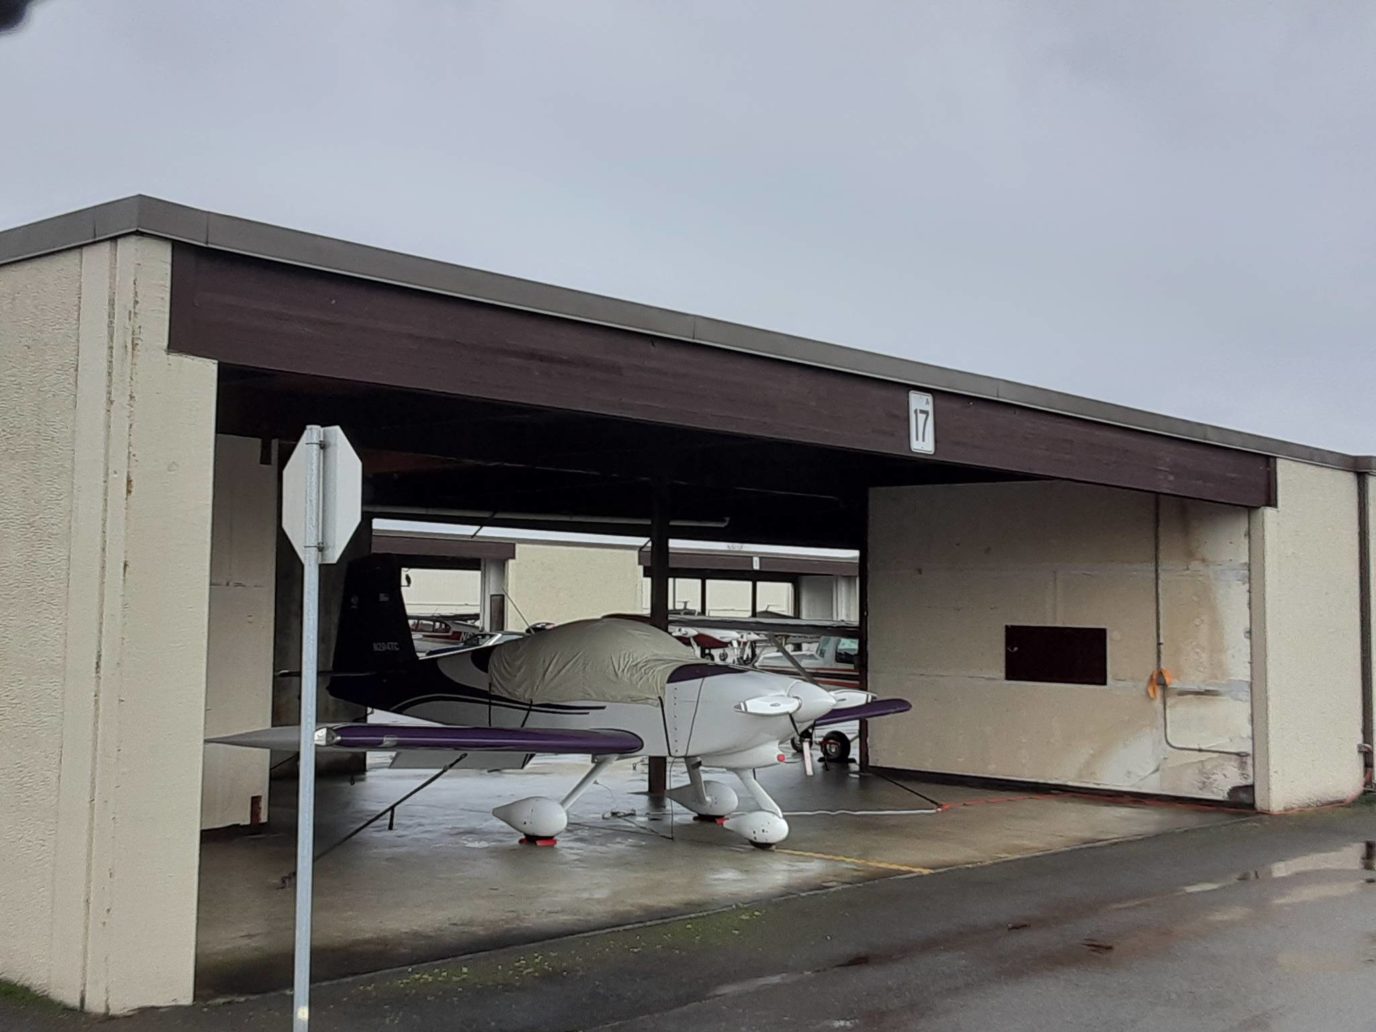 Hangar expansion and more ahead for Auburn airport Auburn Reporter